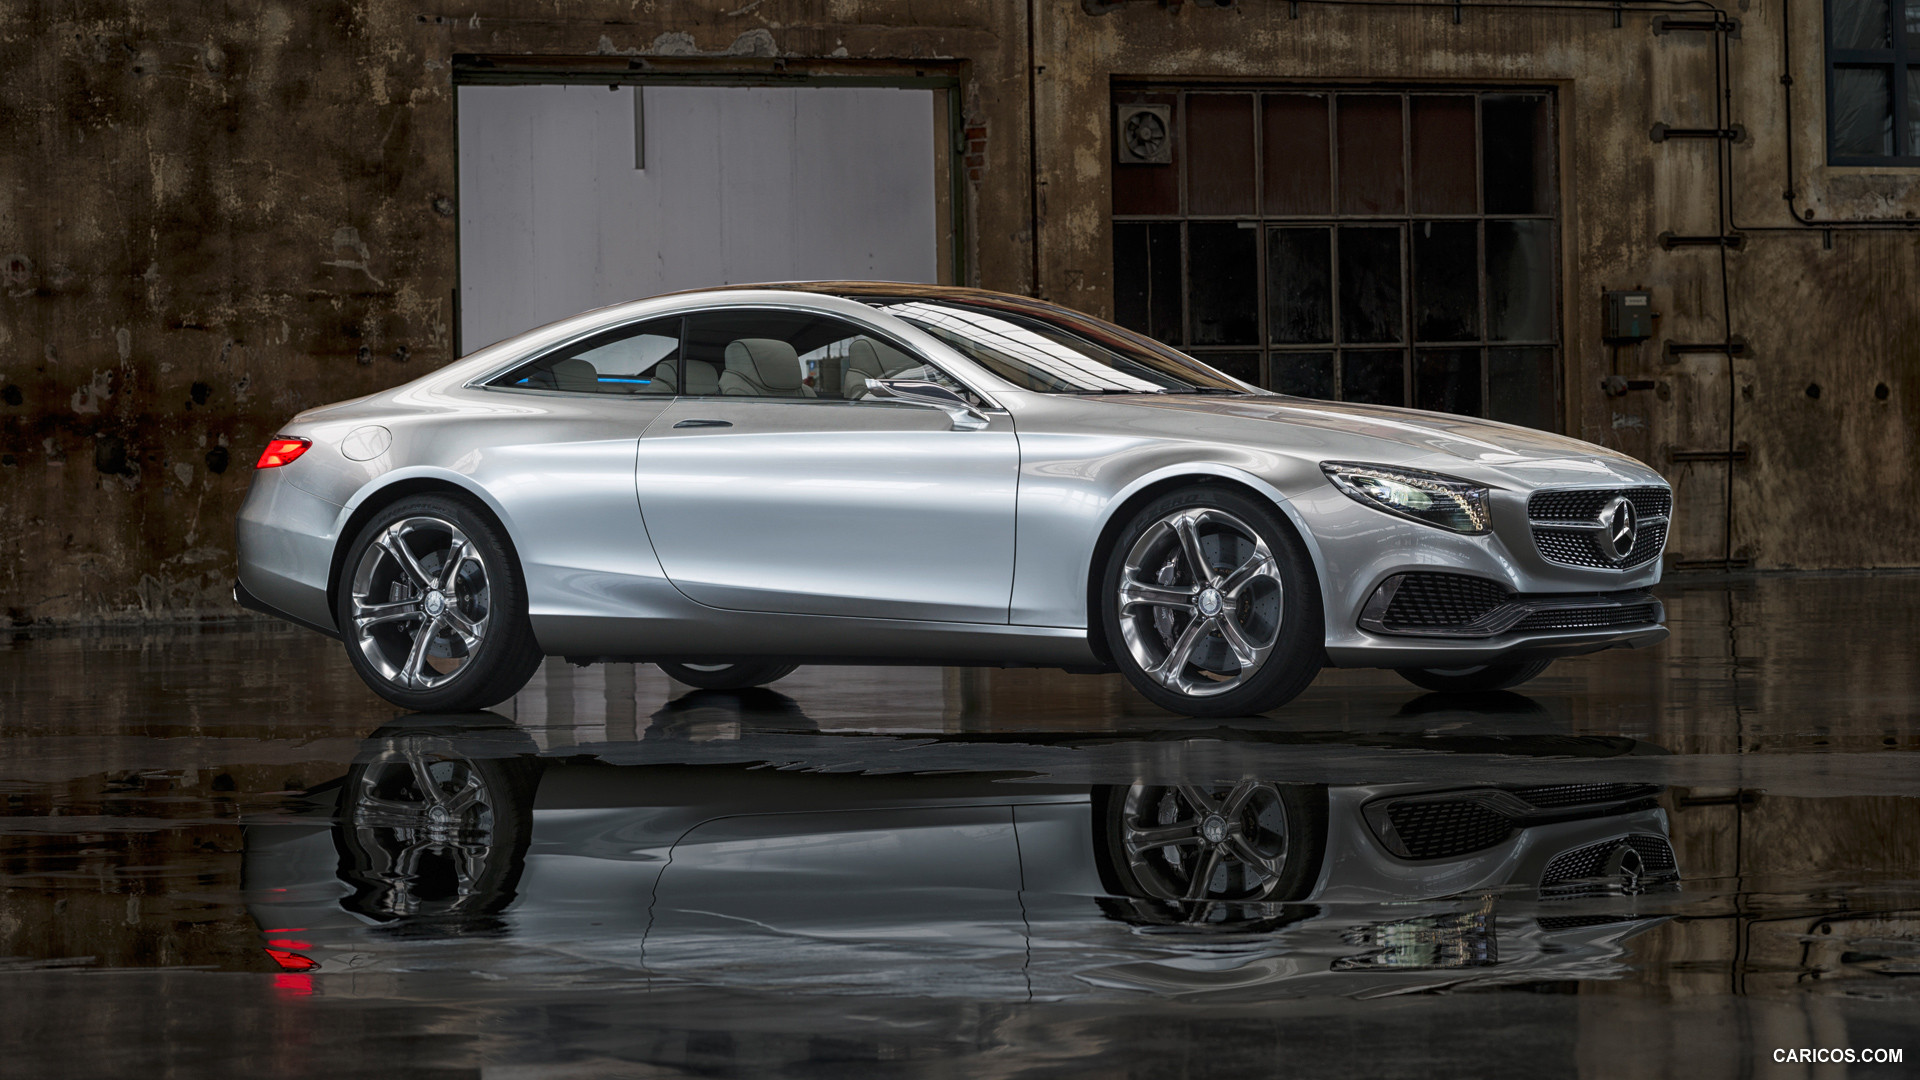 Mercedes-Benz S-Class Coupe Concept (2013)  - Side, #12 of 58